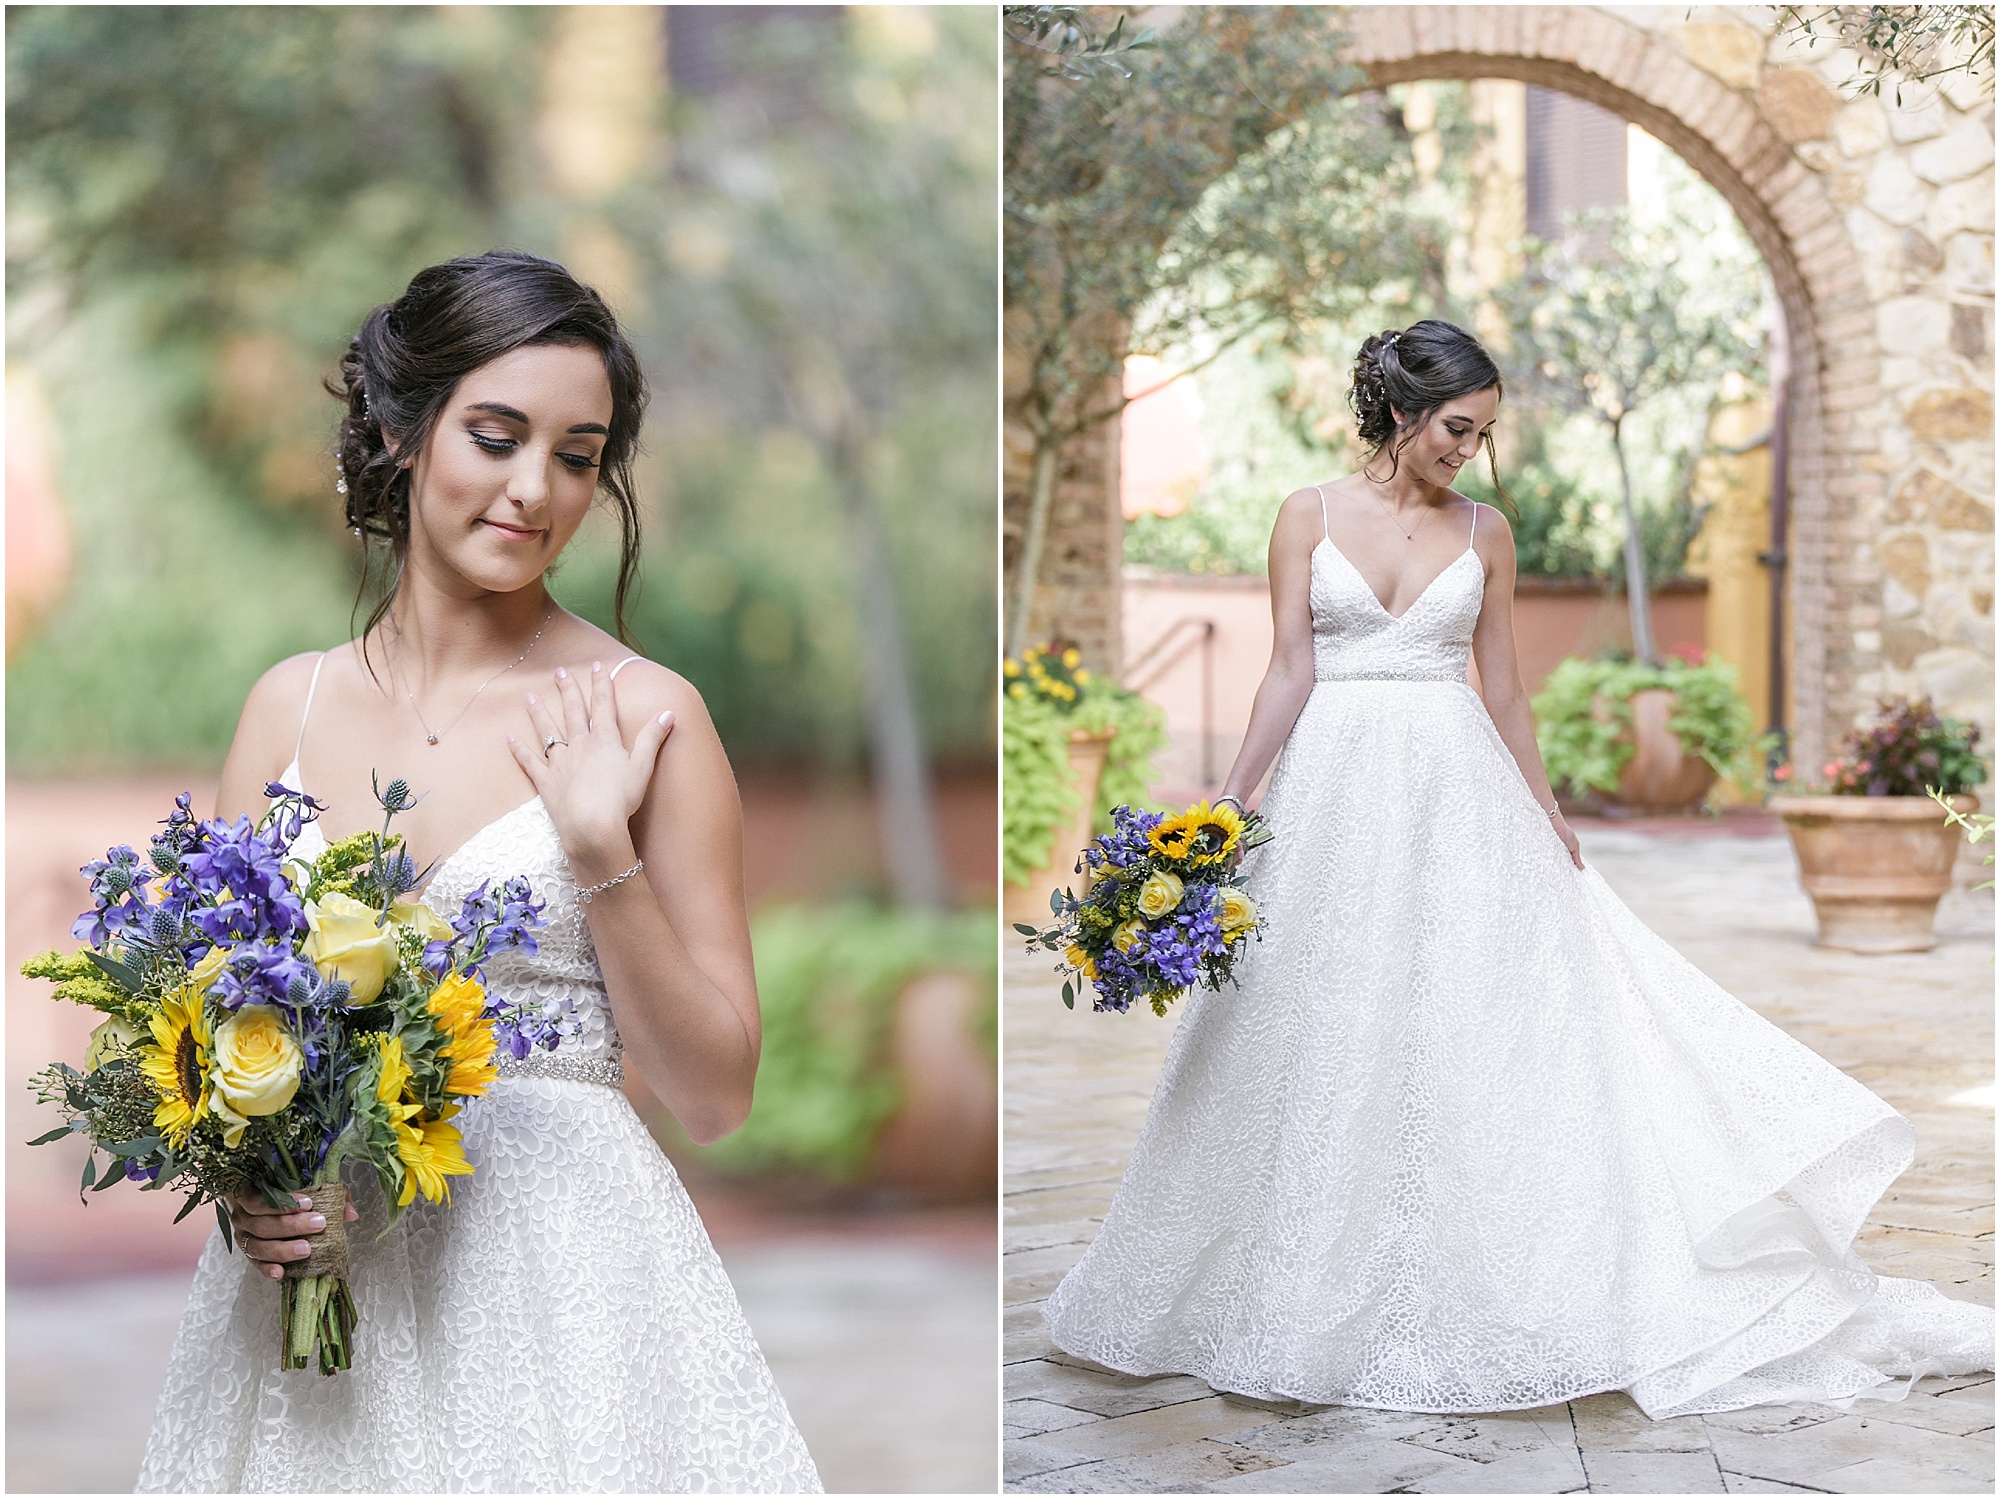 Bride posing for portraits with her sunflower and purple flower bouquet.